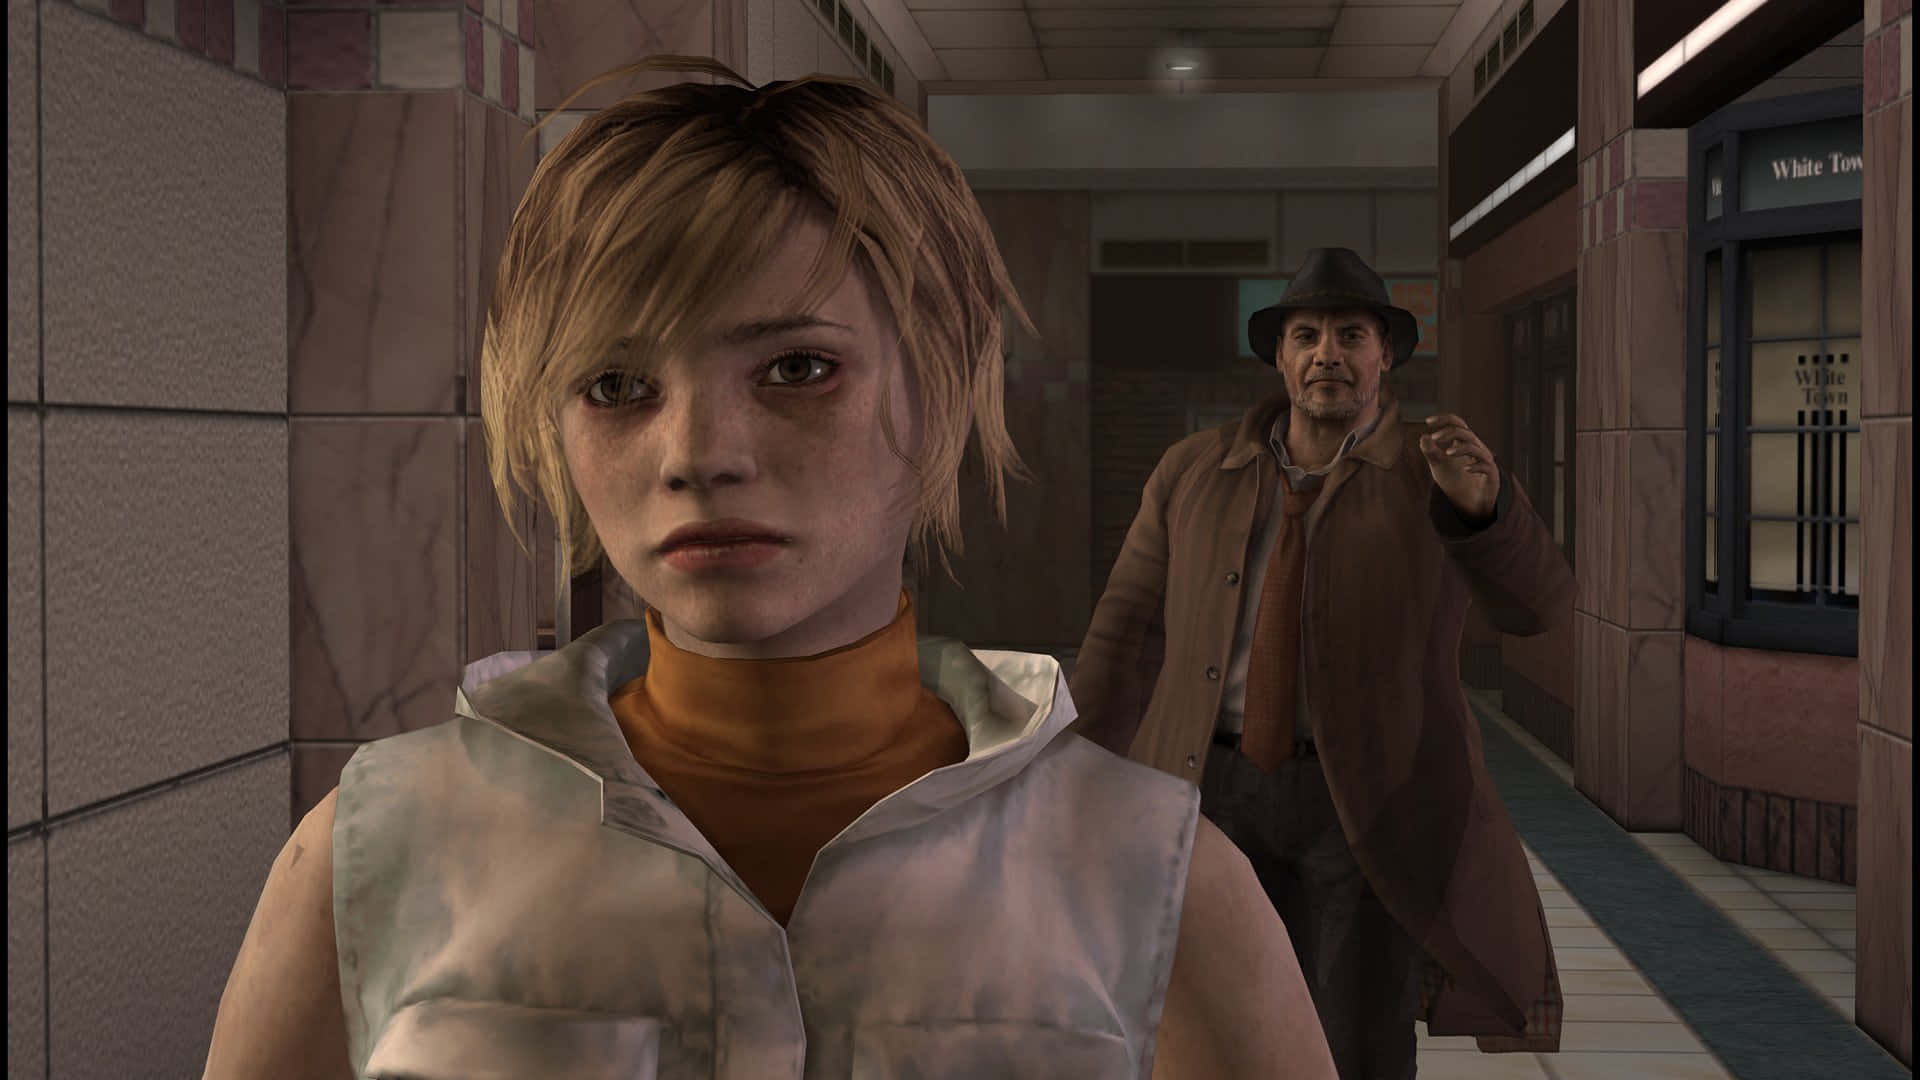 Uncover the Mysteries of Silent Hill